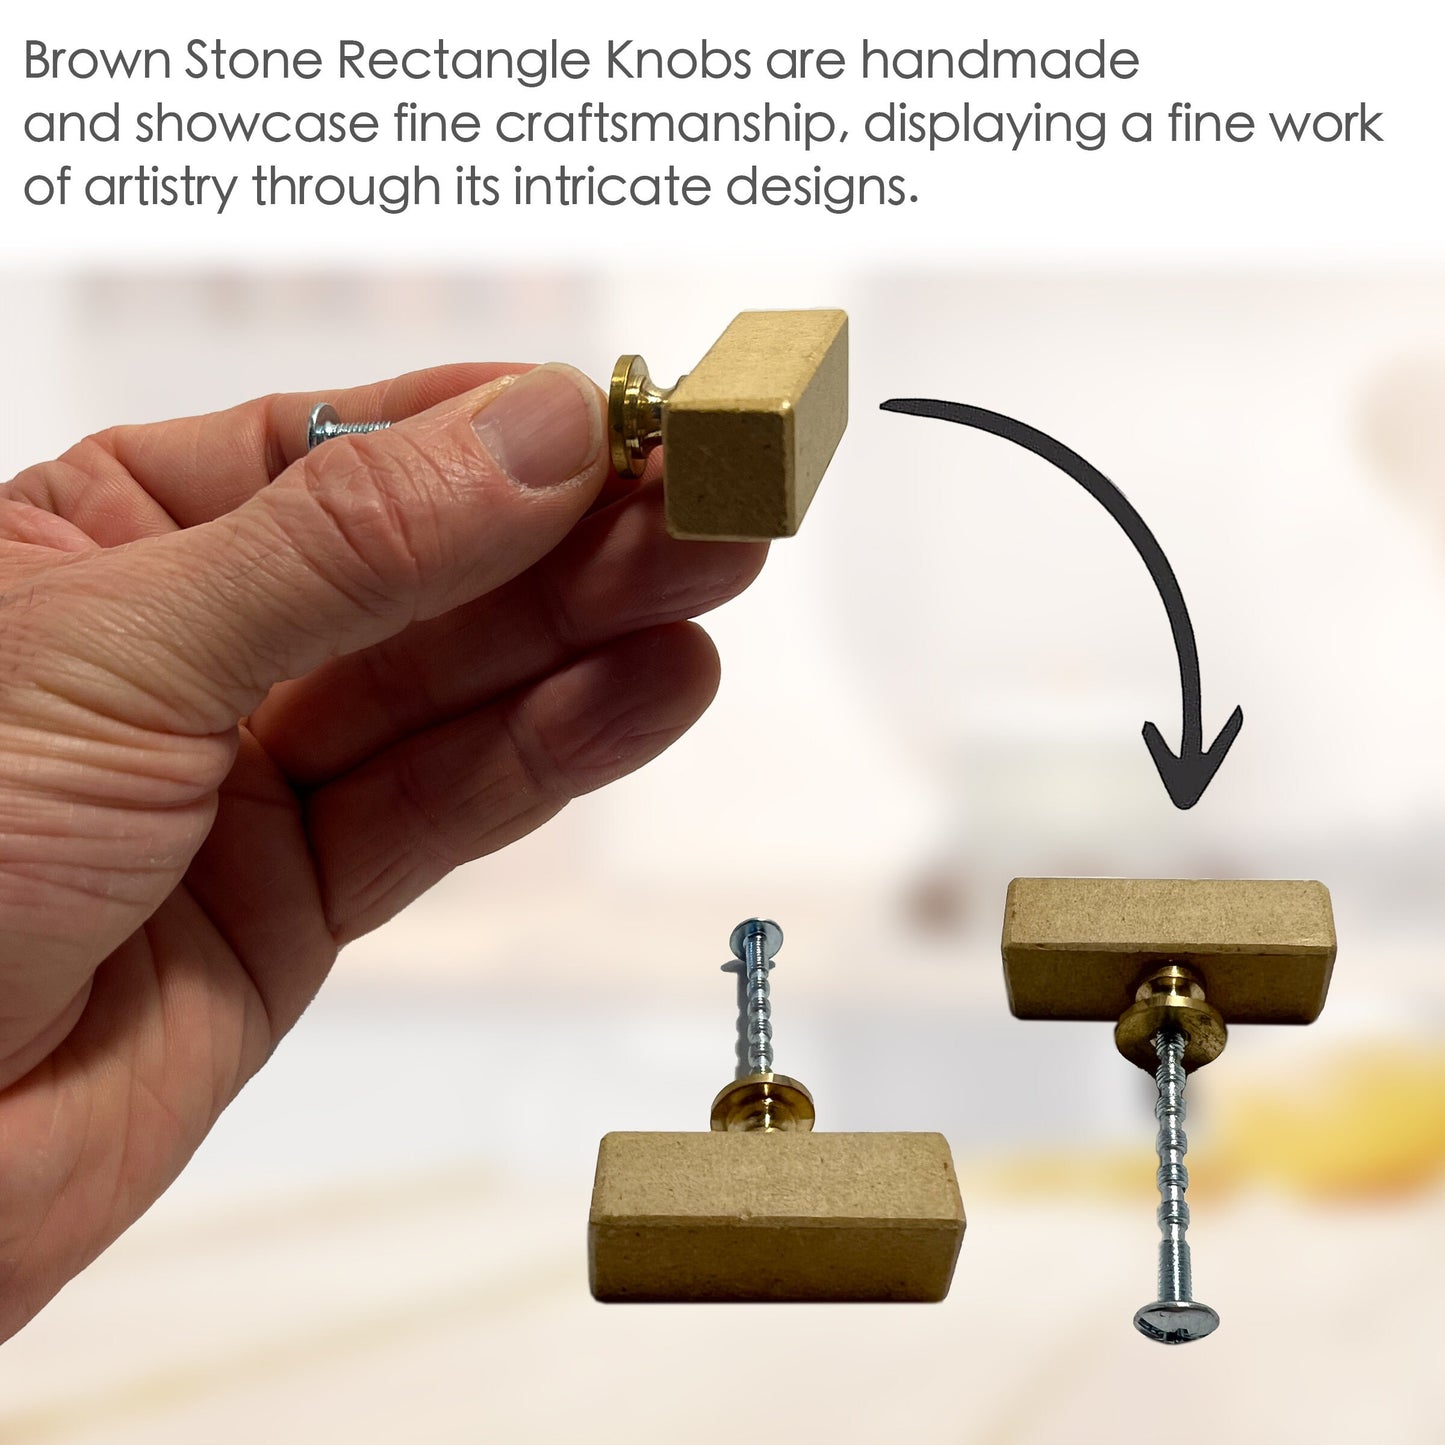 Stone Rectangle Cabinet Knobs 6 Pack Knobs for Cabinets and Drawers, Closet Knobs, Drawer Pulls and Knobs with Mounting Screws (Ocher Brown)